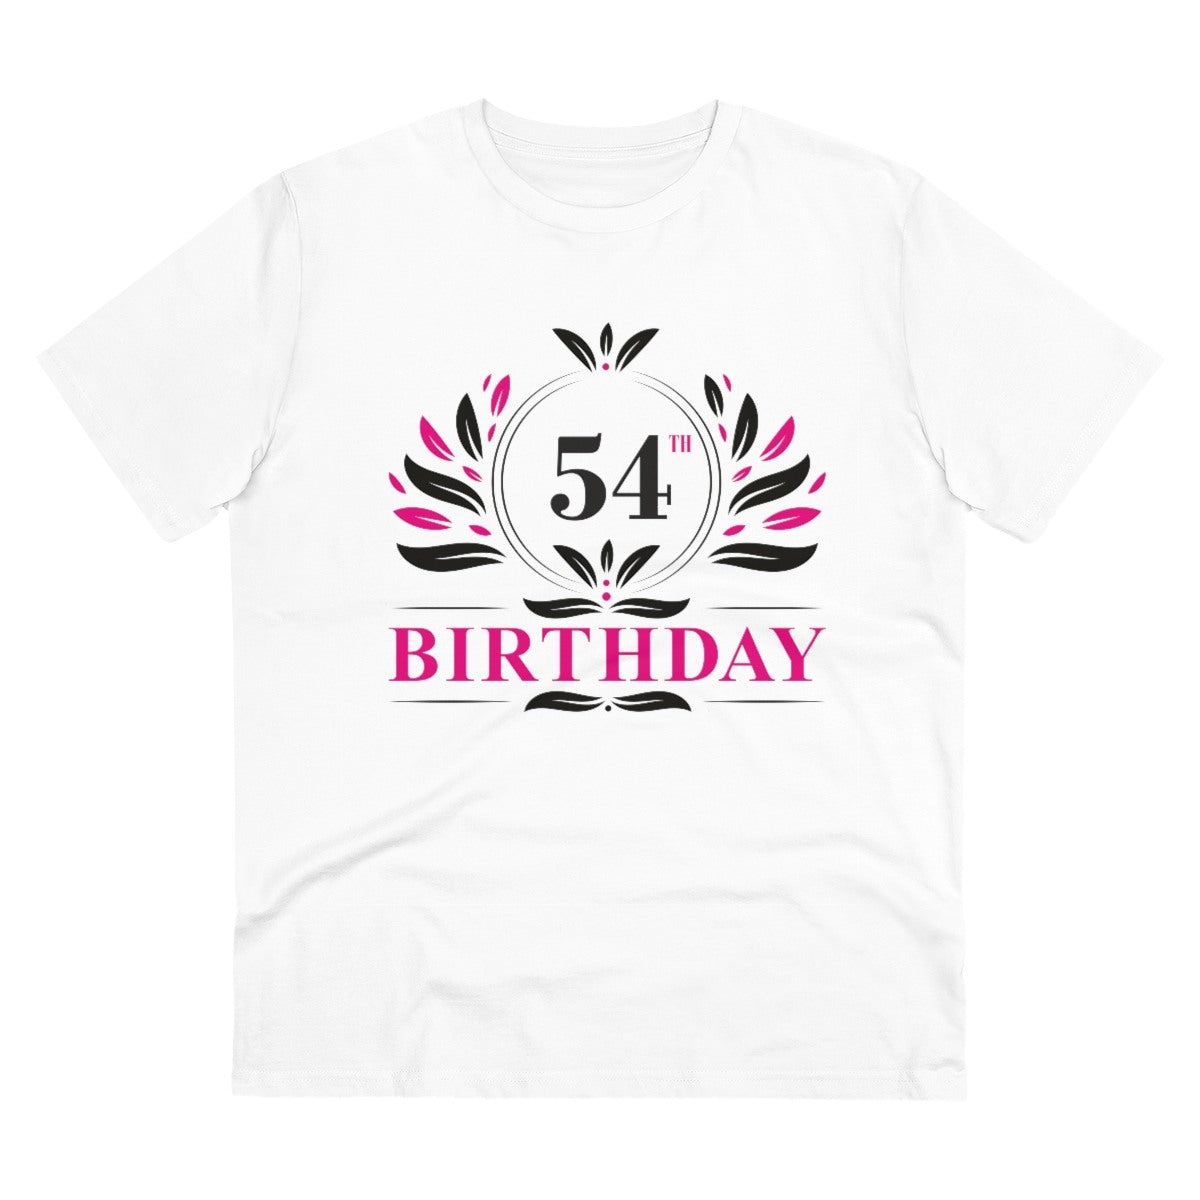 Men's PC Cotton 54th Birthday Printed T Shirt (Color: White, Thread Count: 180GSM) - GillKart